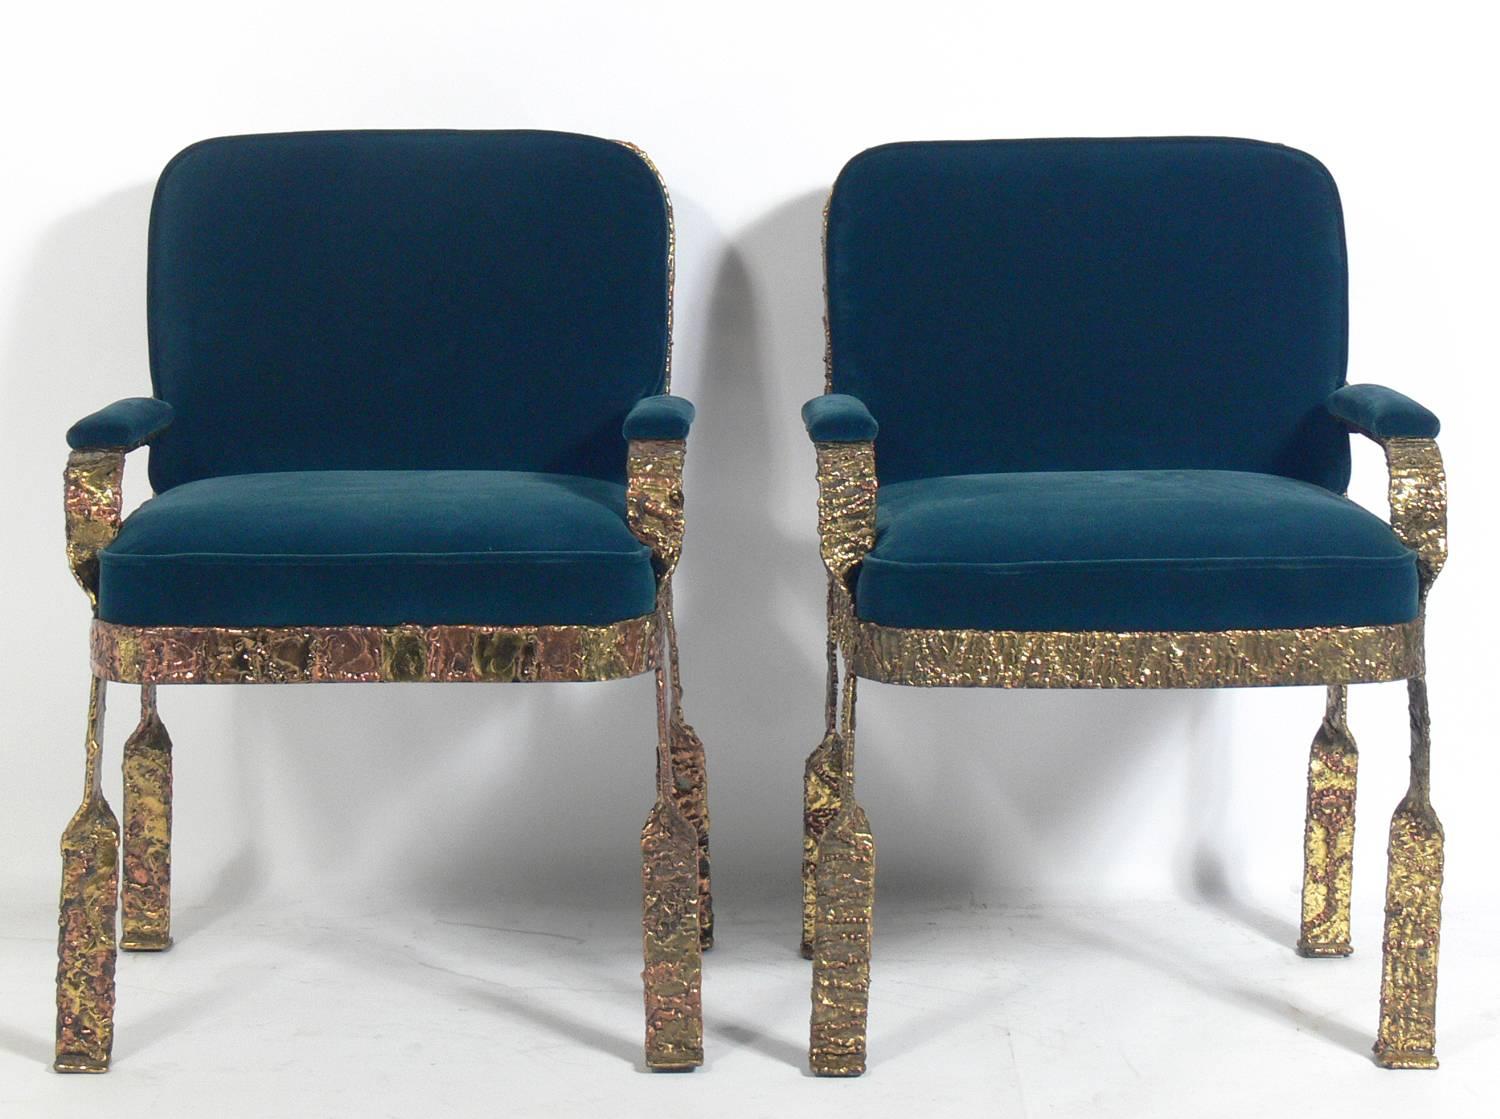 Pair of sculptural lounge chairs, attributed to Silas Seandel, American, circa 1960s. They have been reupholstered in a peacock green velvety fabric. They are very heavy and well made, and are believed to be executed in iron finished in bronze,